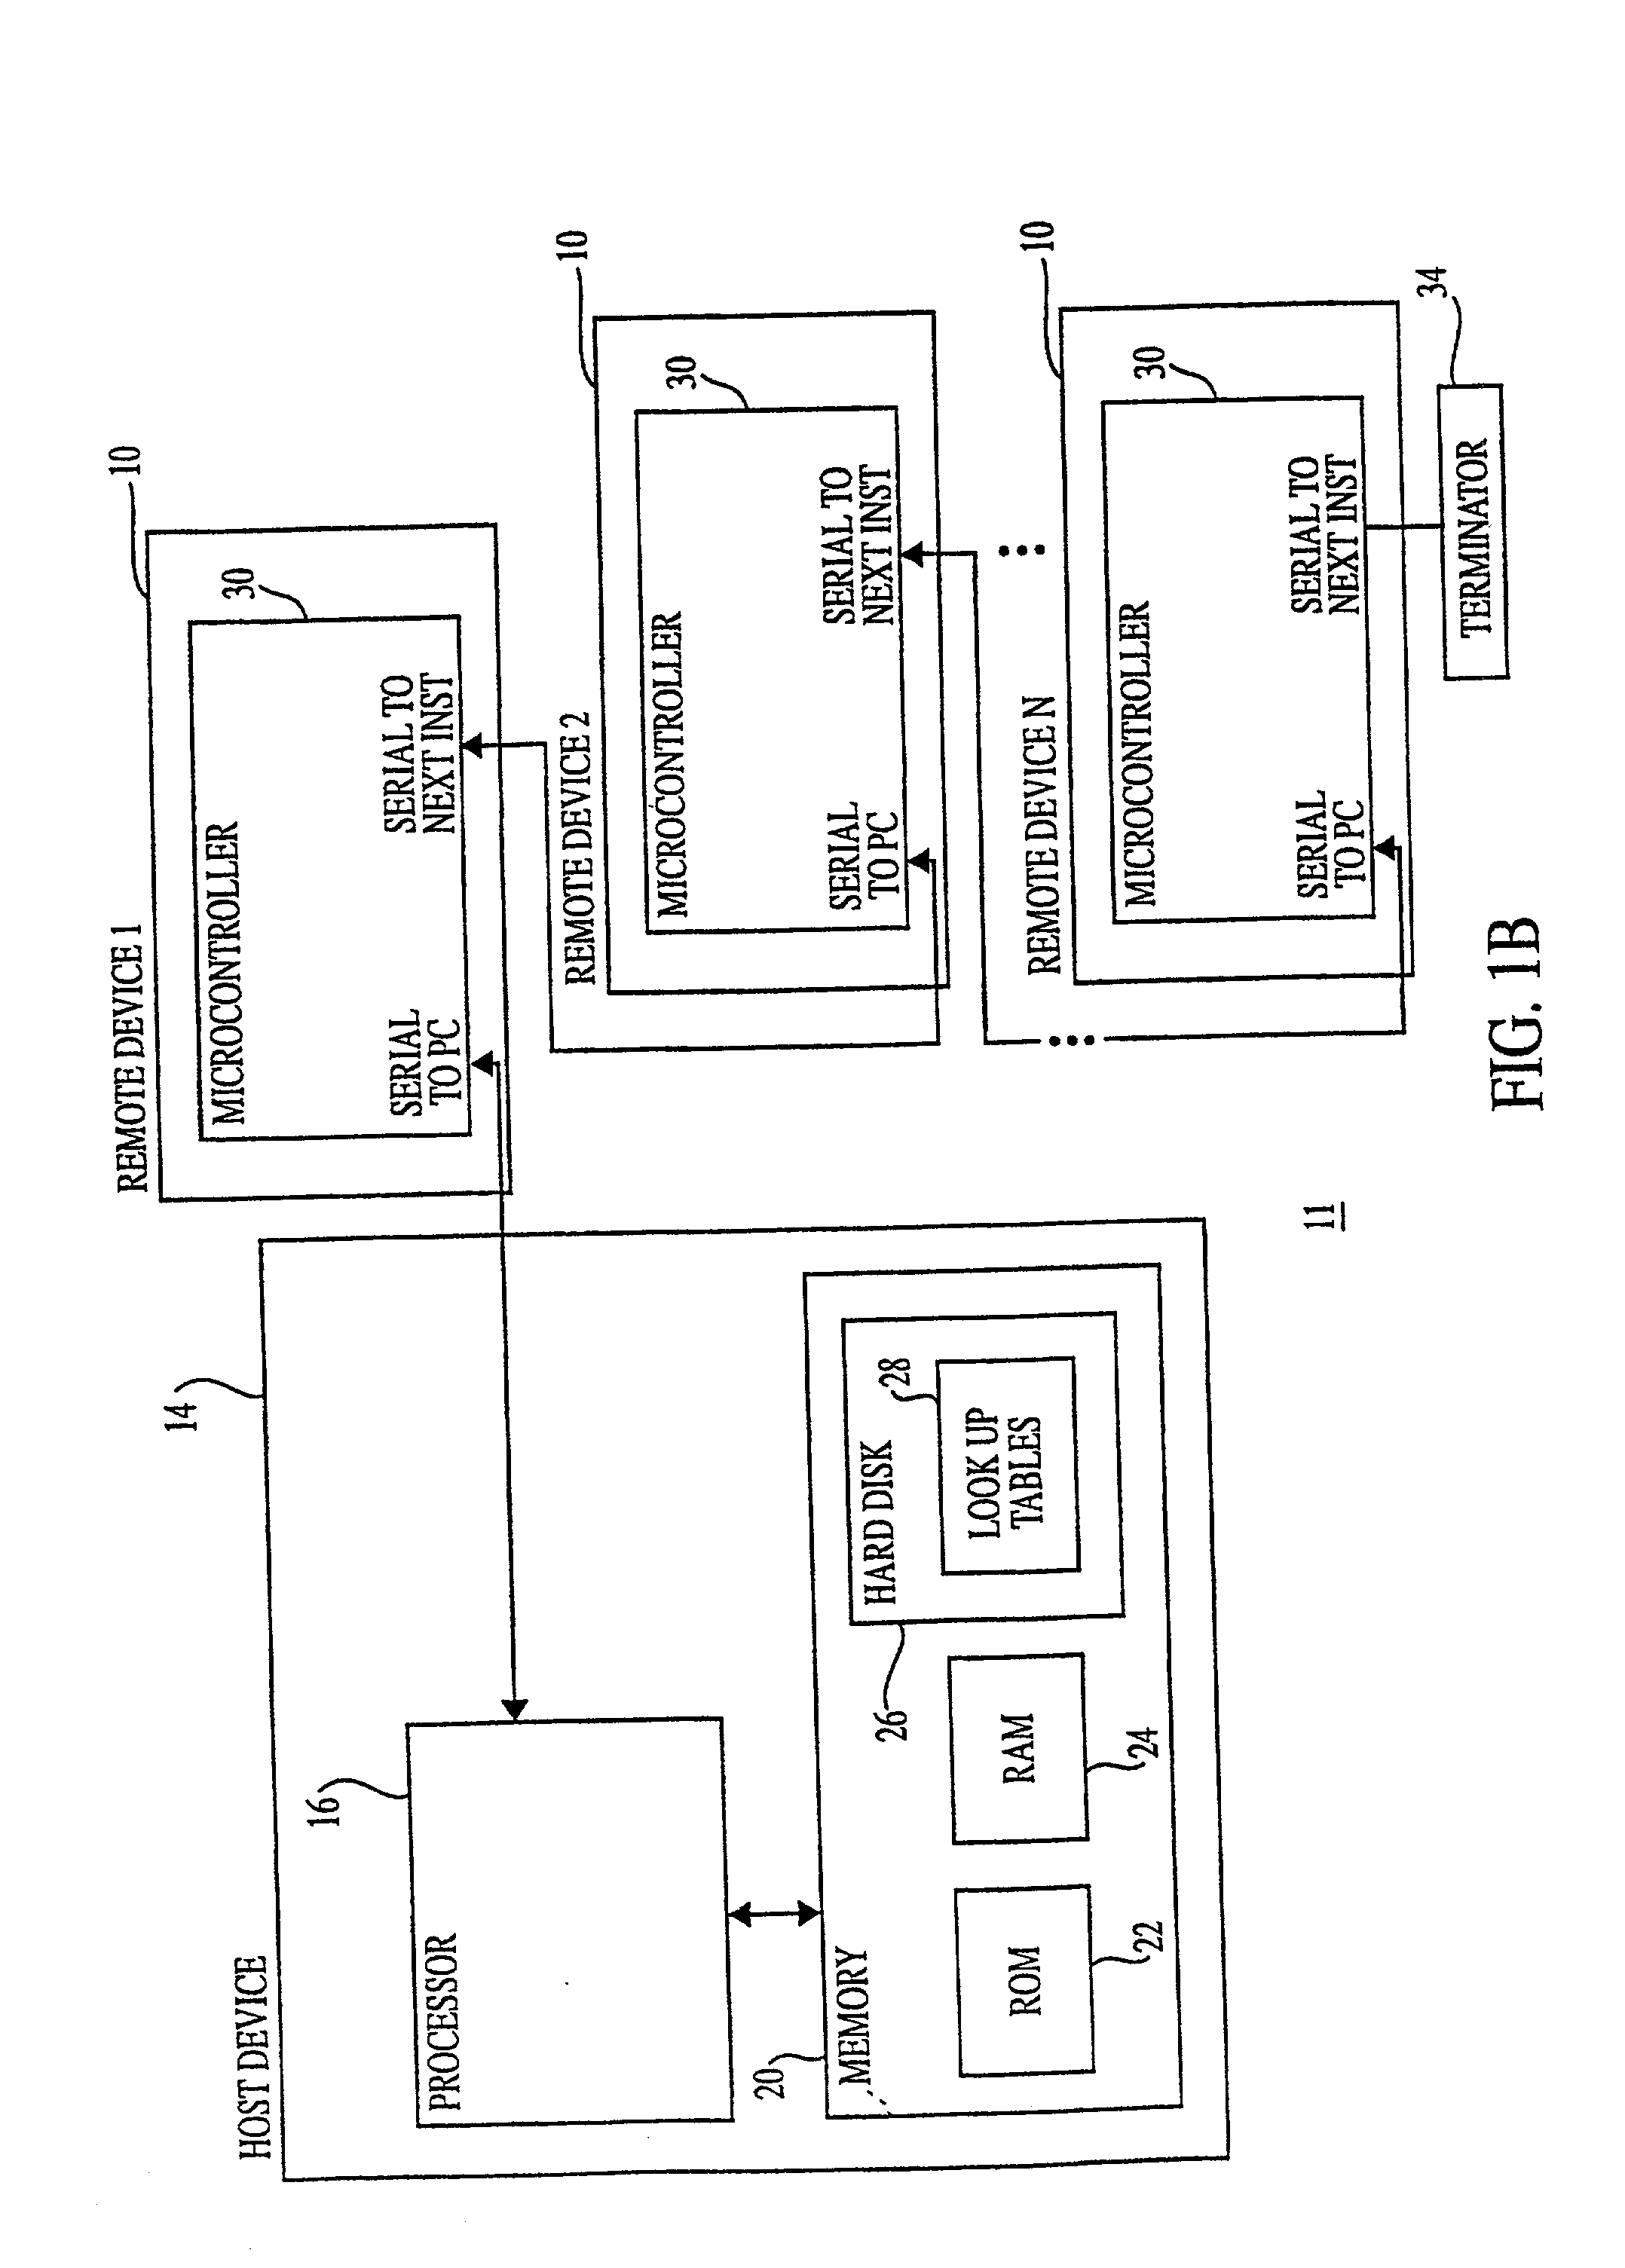 System and method of aspirating and dispensing reagent